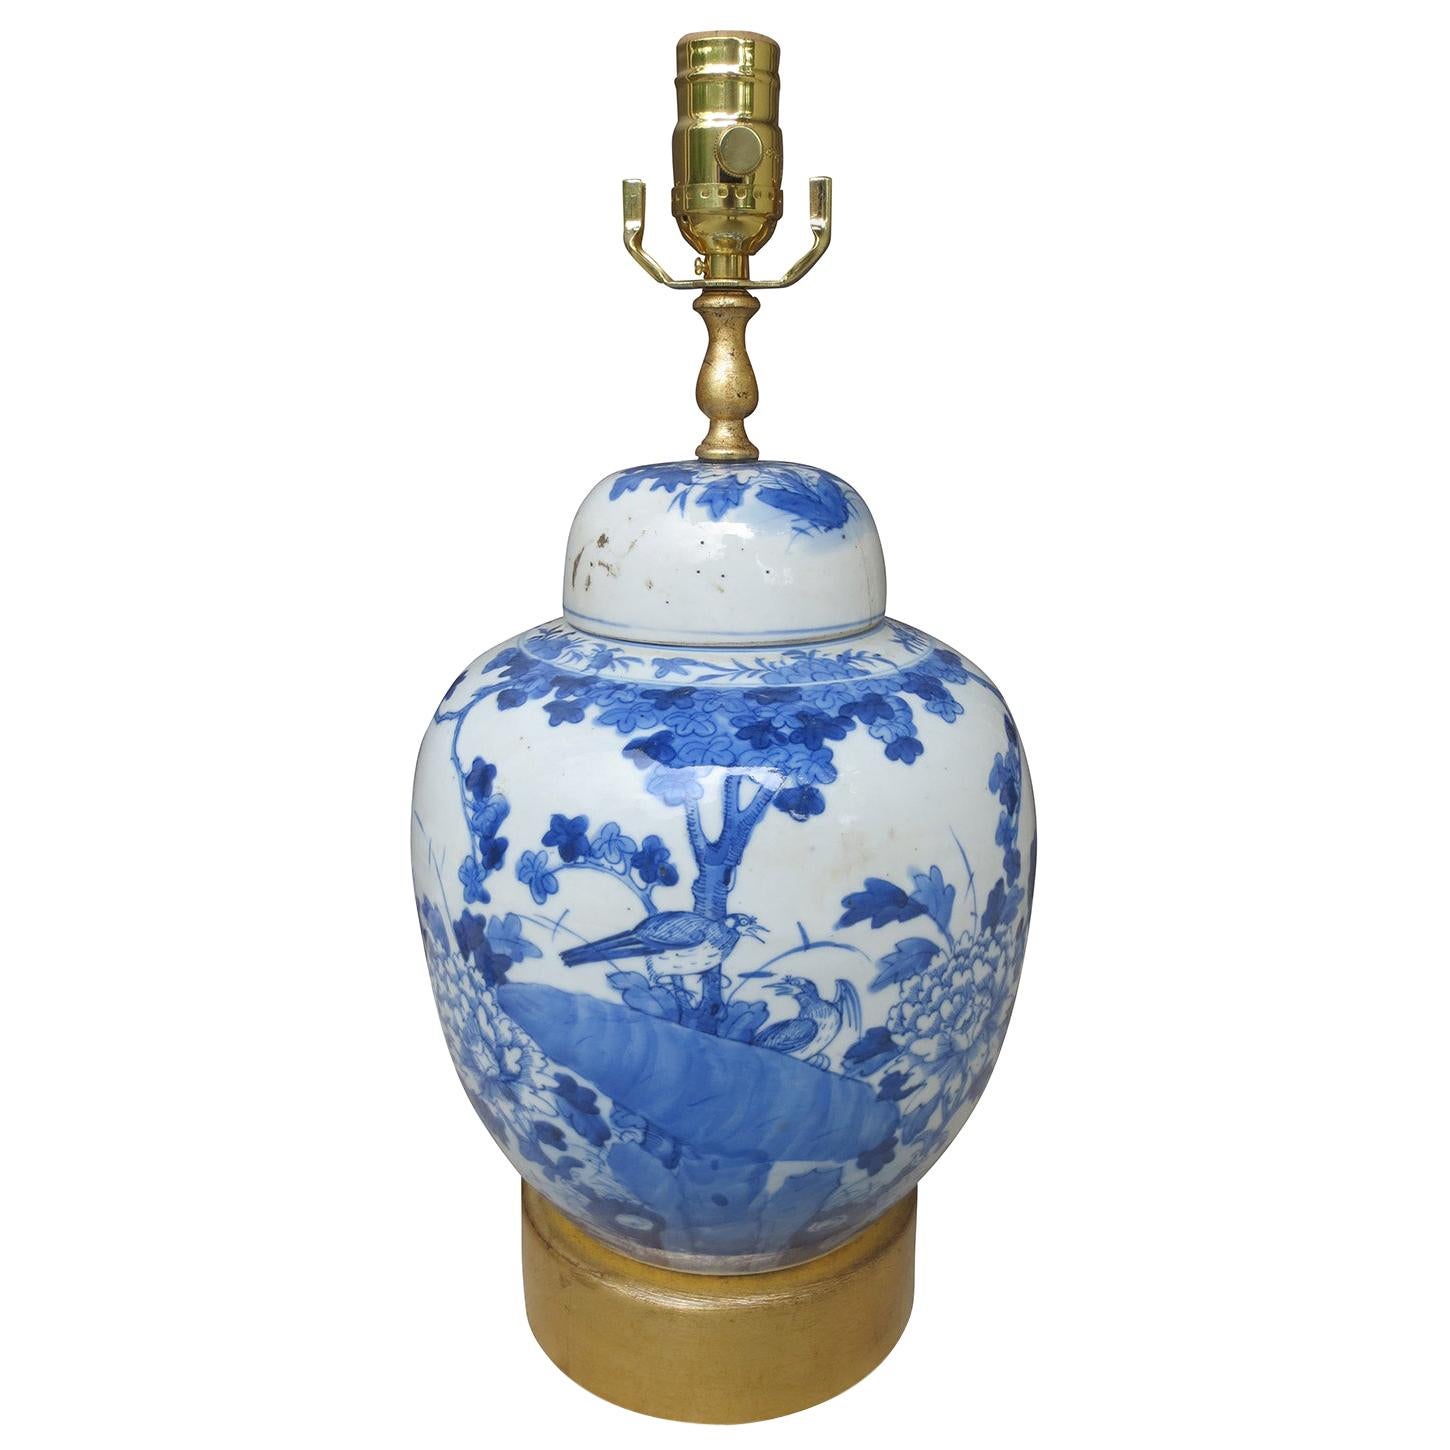 19th-20th Century Chinese Blue and White Porcelain Jar on Custom Giltwood Base